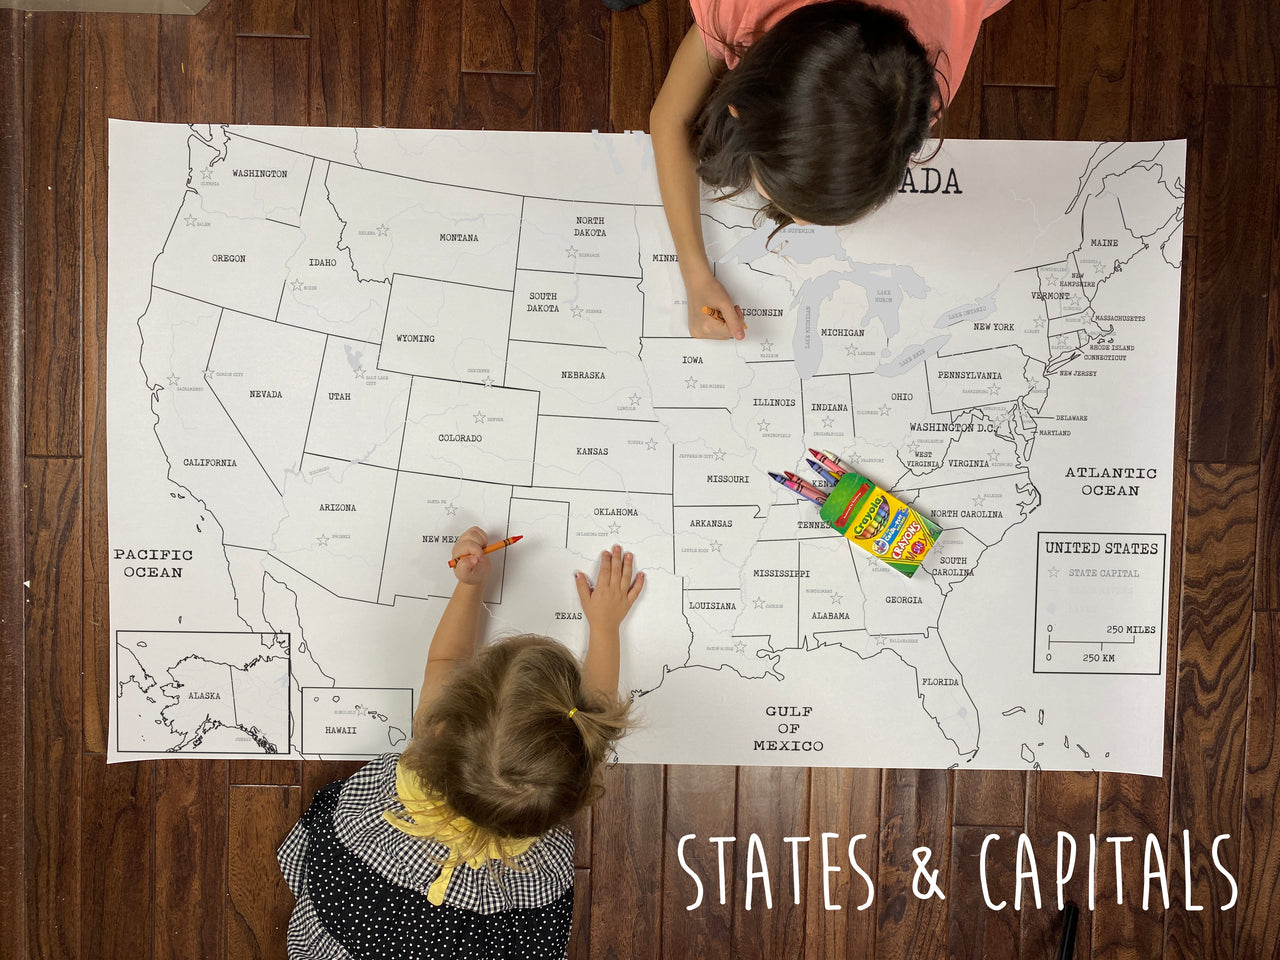 United States & Capitals Coloring Map